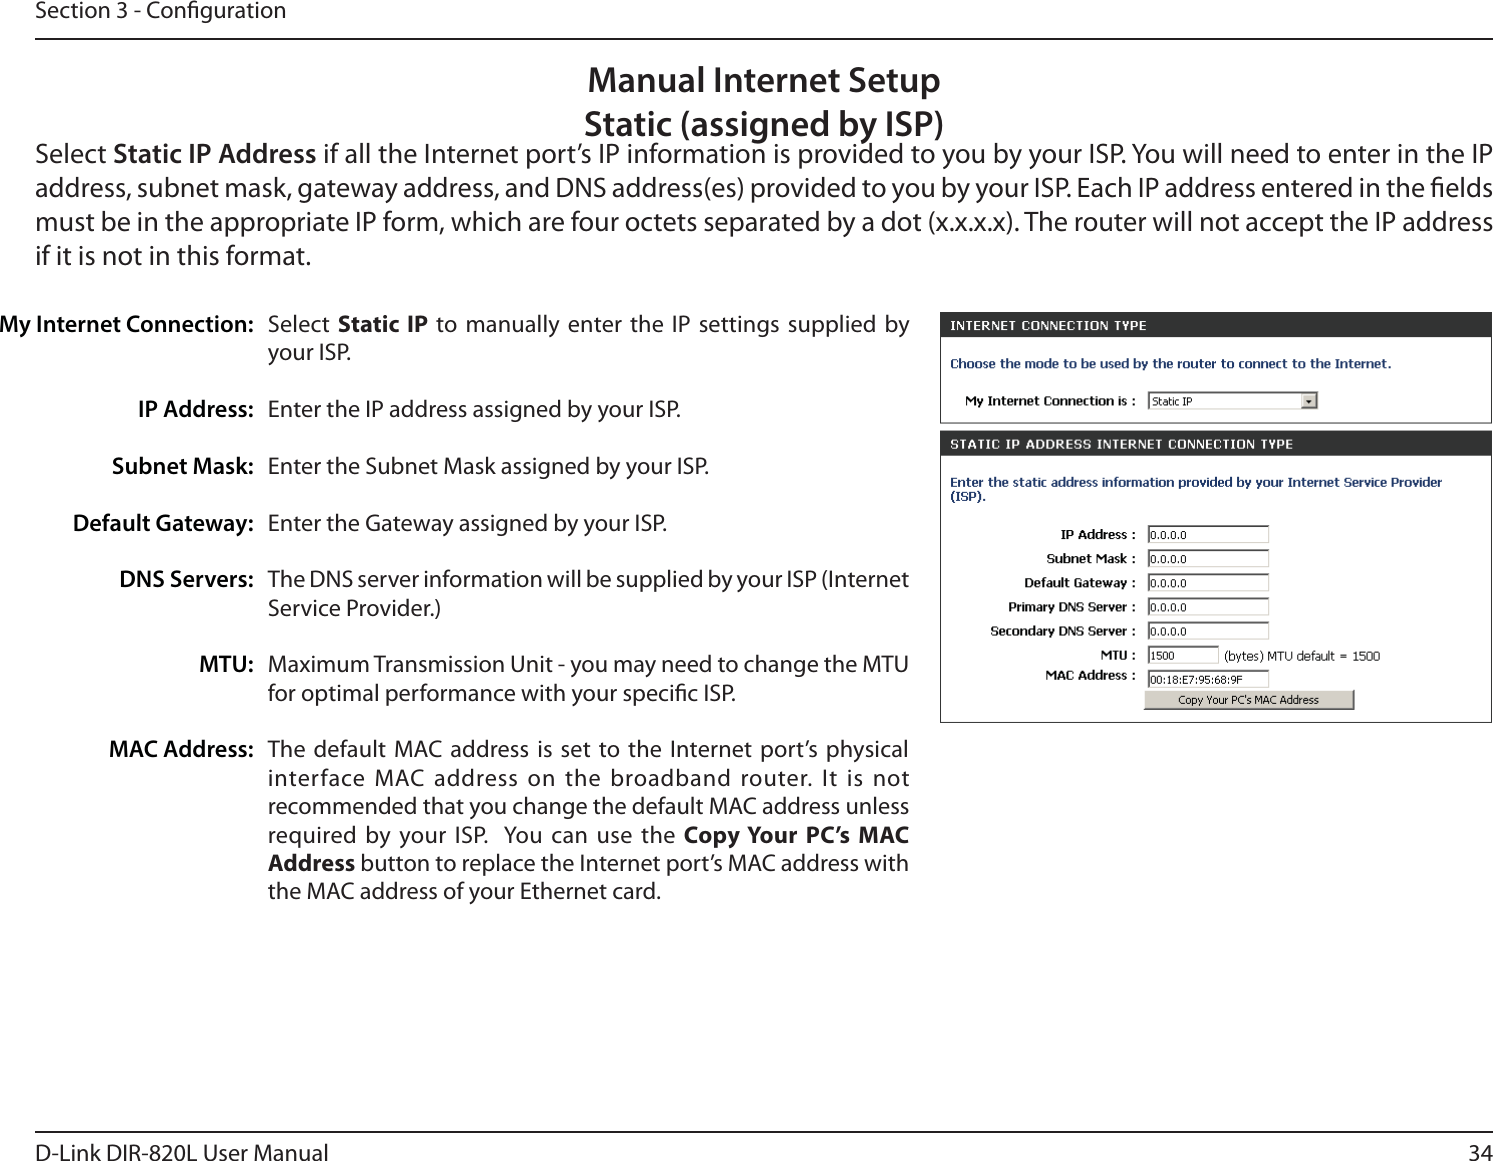 34D-Link DIR-820L User ManualSection 3 - CongurationSelect  Static IP to manually enter the IP settings supplied by your ISP.Enter the IP address assigned by your ISP.Enter the Subnet Mask assigned by your ISP.Enter the Gateway assigned by your ISP.The DNS server information will be supplied by your ISP (Internet Service Provider.)Maximum Transmission Unit - you may need to change the MTU for optimal performance with your specic ISP. The default MAC address is set to the Internet port’s physical interface MAC address on the broadband router. It is not recommended that you change the default MAC address unless required by your ISP.  You can use the Copy Your PC’s MAC Address button to replace the Internet port’s MAC address with the MAC address of your Ethernet card.My Internet Connection:IP Address:Subnet Mask:Default Gateway:DNS Servers:MTU:MAC Address:Manual Internet SetupStatic (assigned by ISP)Select Static IP Address if all the Internet port’s IP information is provided to you by your ISP. You will need to enter in the IP address, subnet mask, gateway address, and DNS address(es) provided to you by your ISP. Each IP address entered in the elds must be in the appropriate IP form, which are four octets separated by a dot (x.x.x.x). The router will not accept the IP address if it is not in this format.